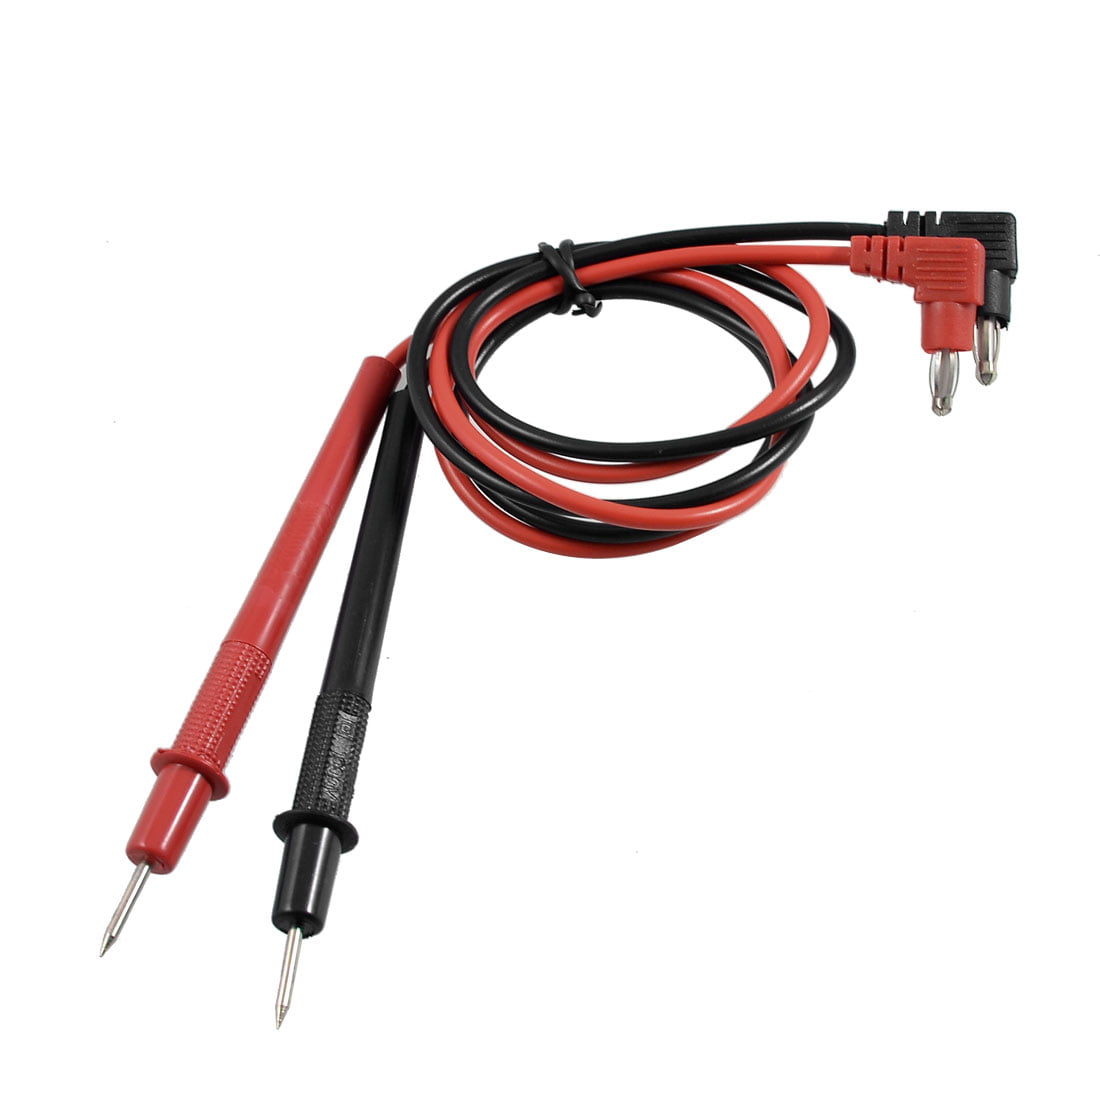 RED & BLACK 4MM FEMALE END TEST PROBE 1000V AC & DC VOLTAGE RATED 1A CURRENT 